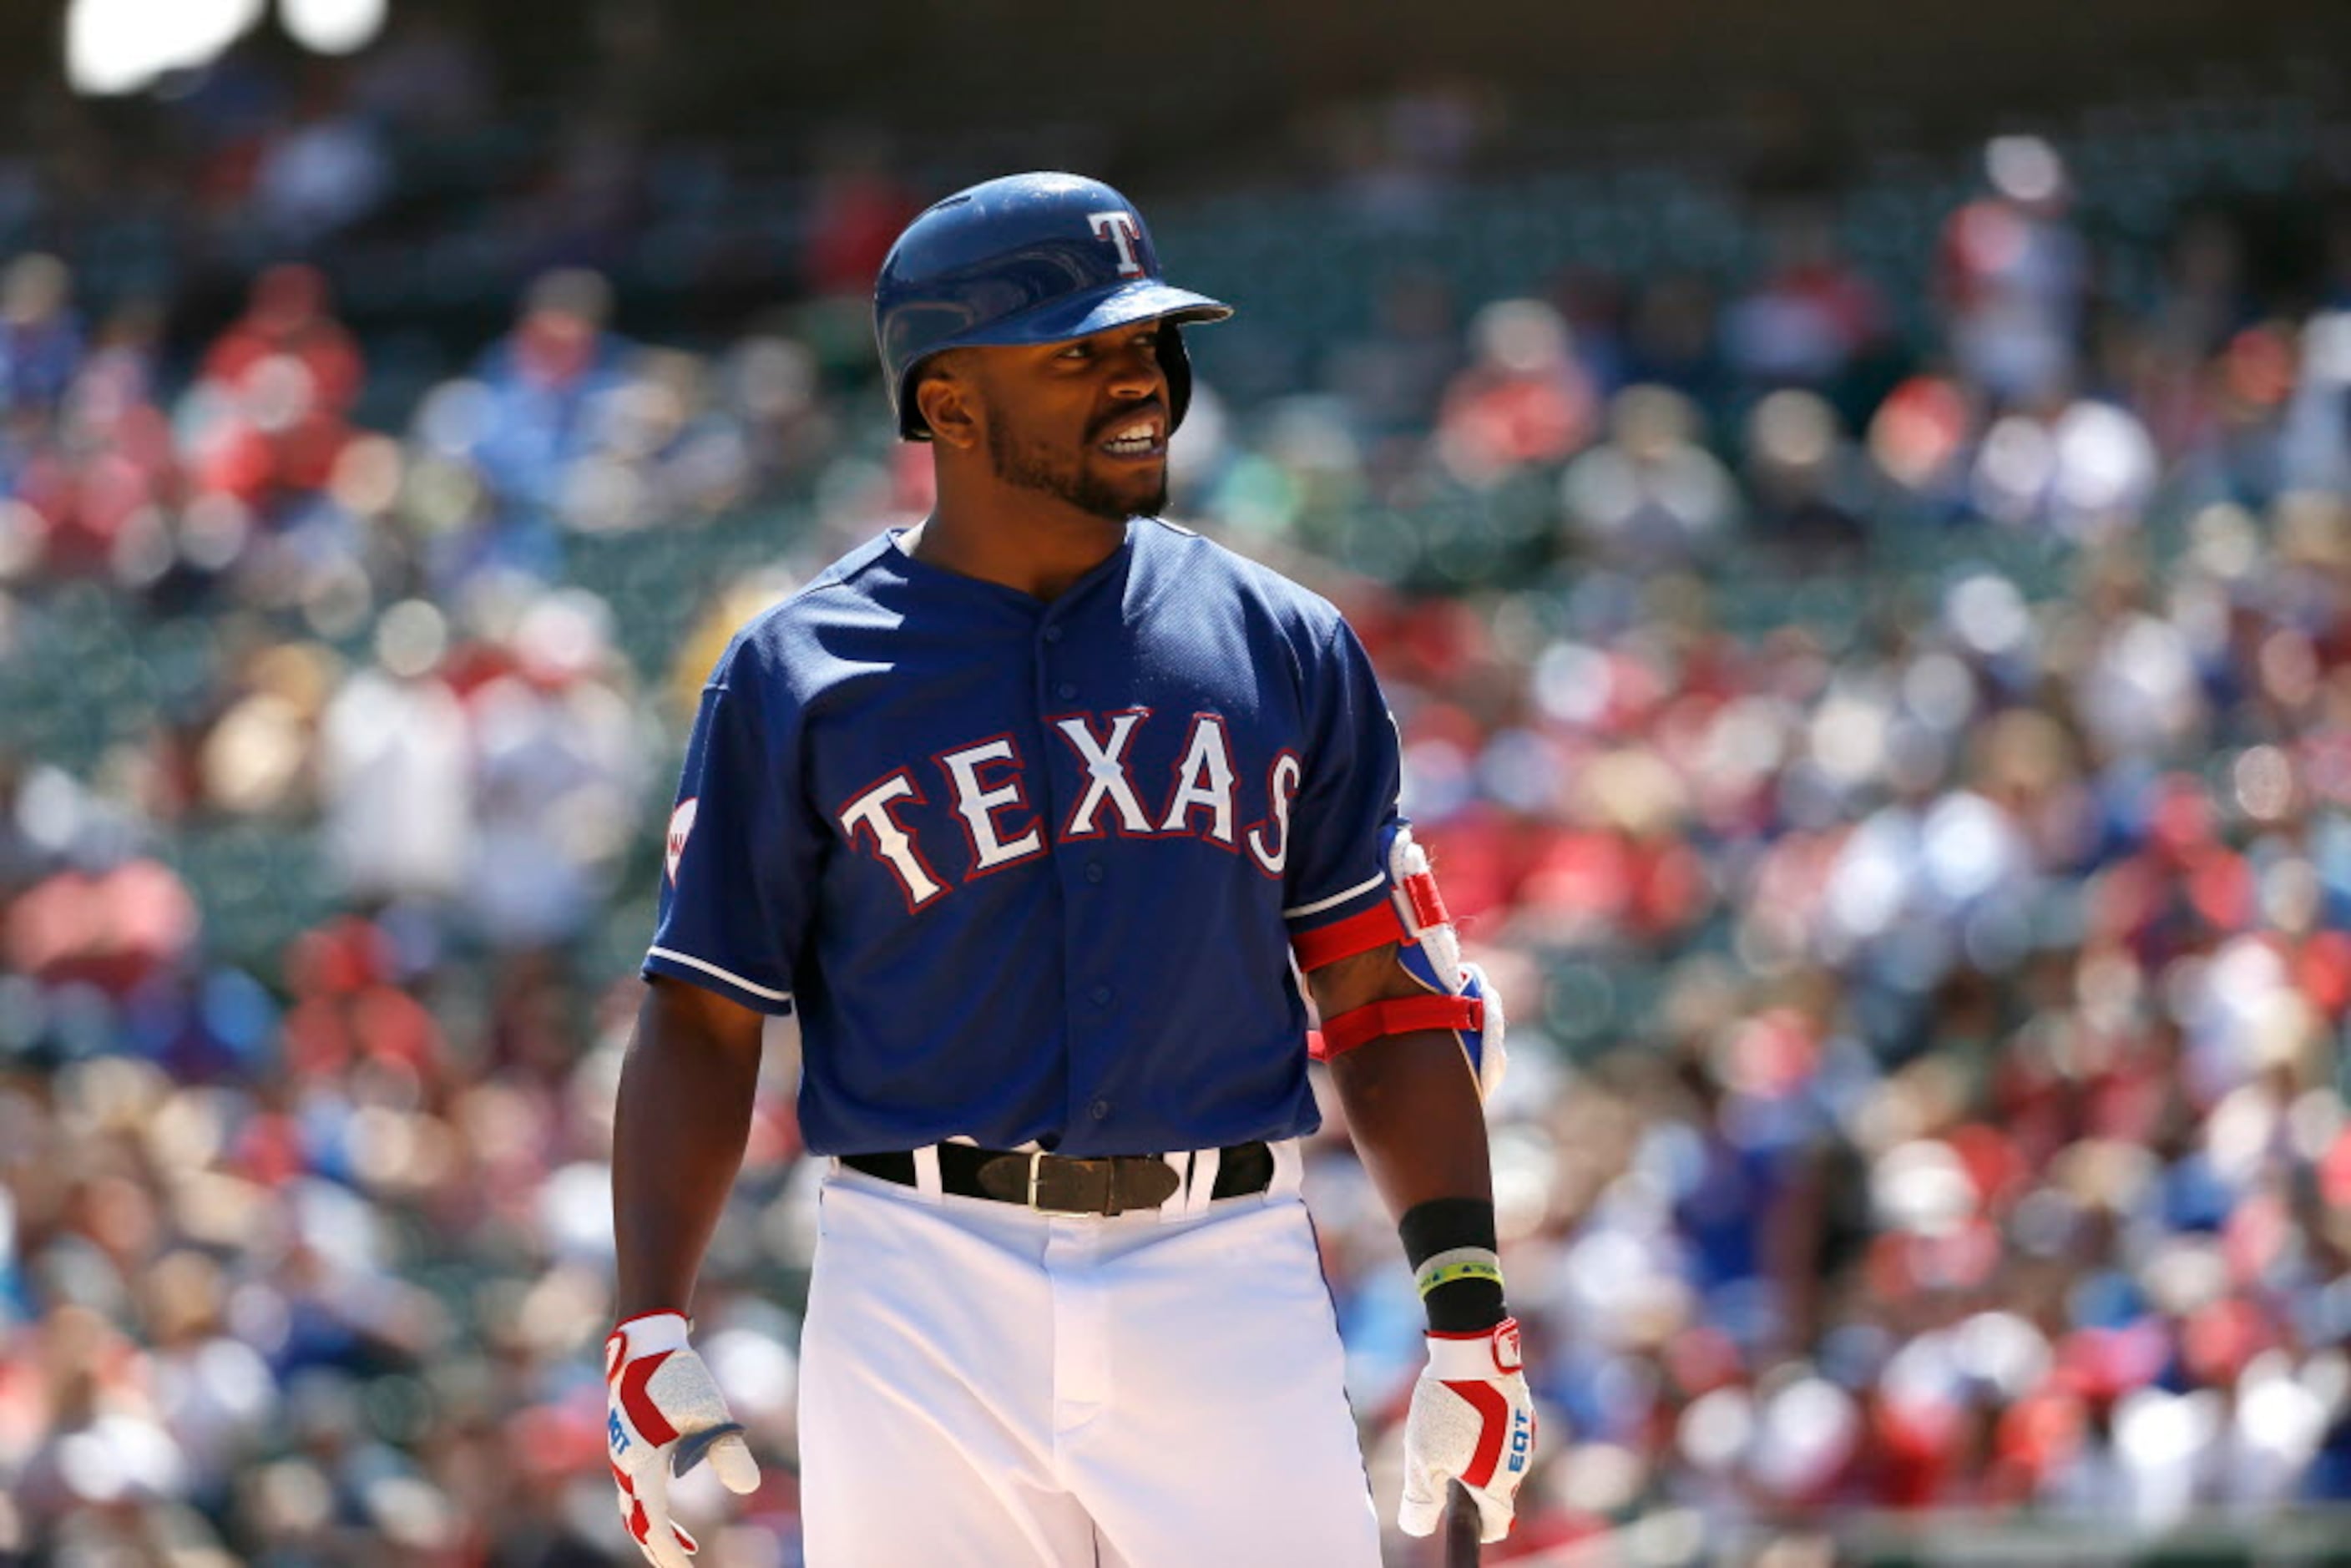 Sunday will be a sentimental Father's Day for Rangers CF Delino DeShields'  family